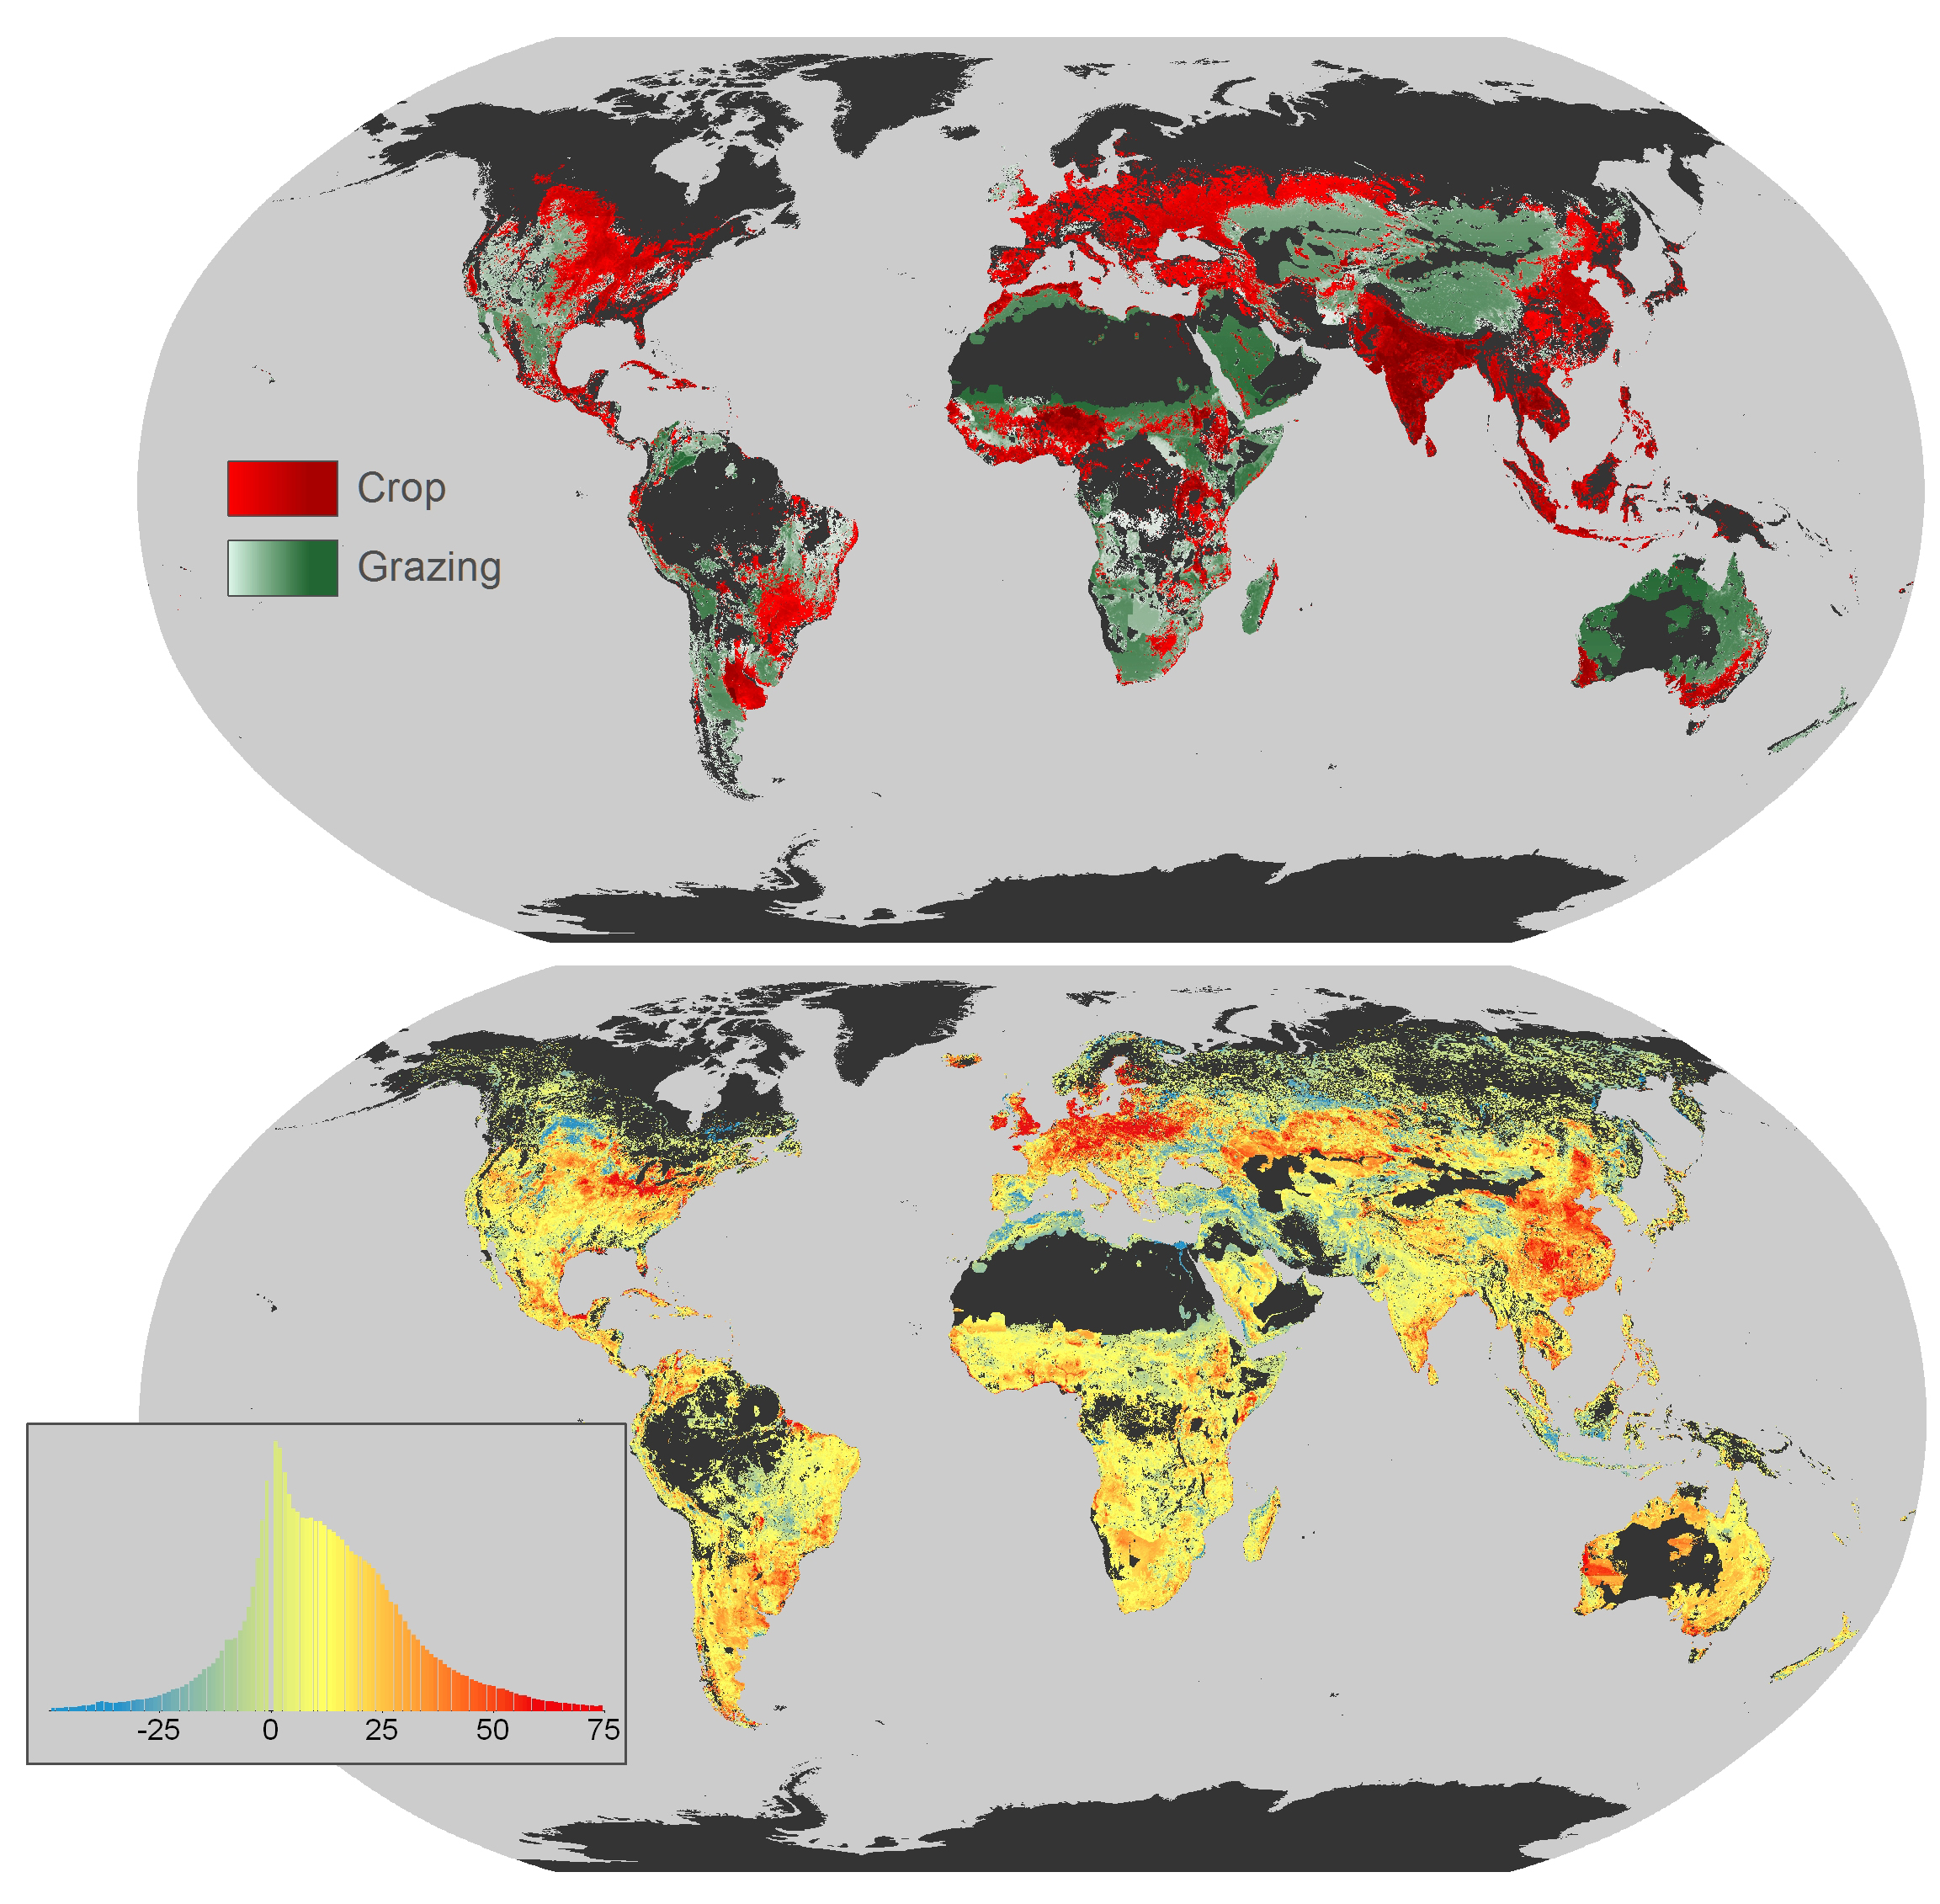 Global map of SOCS loss due to land use